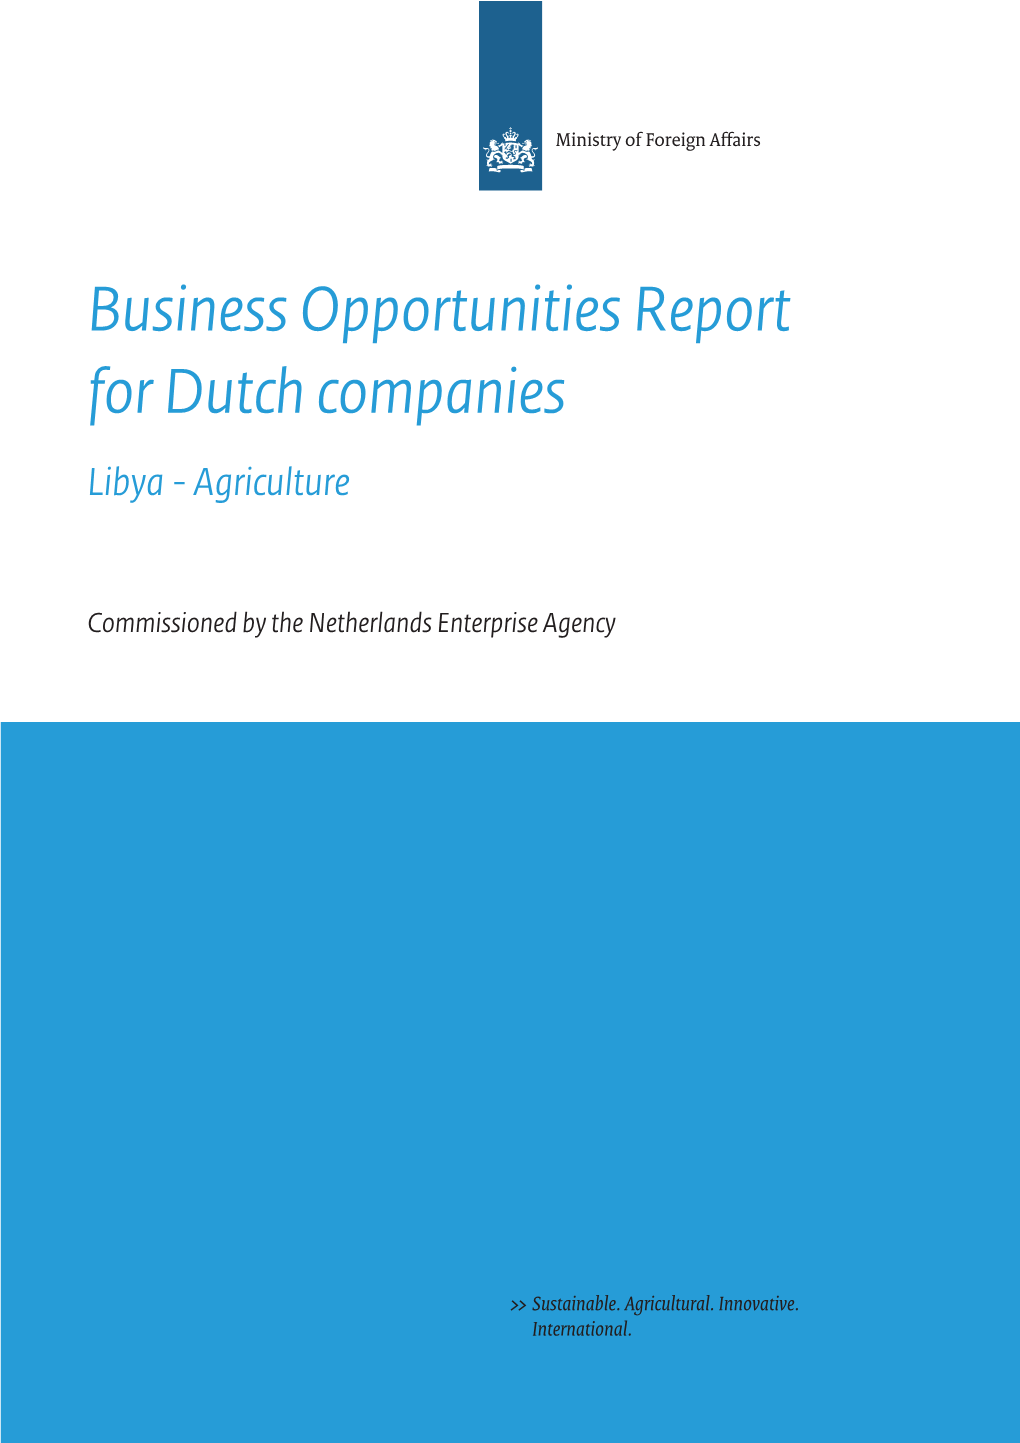 Business Opportunities Report for Dutch Companies Libya - Agriculture